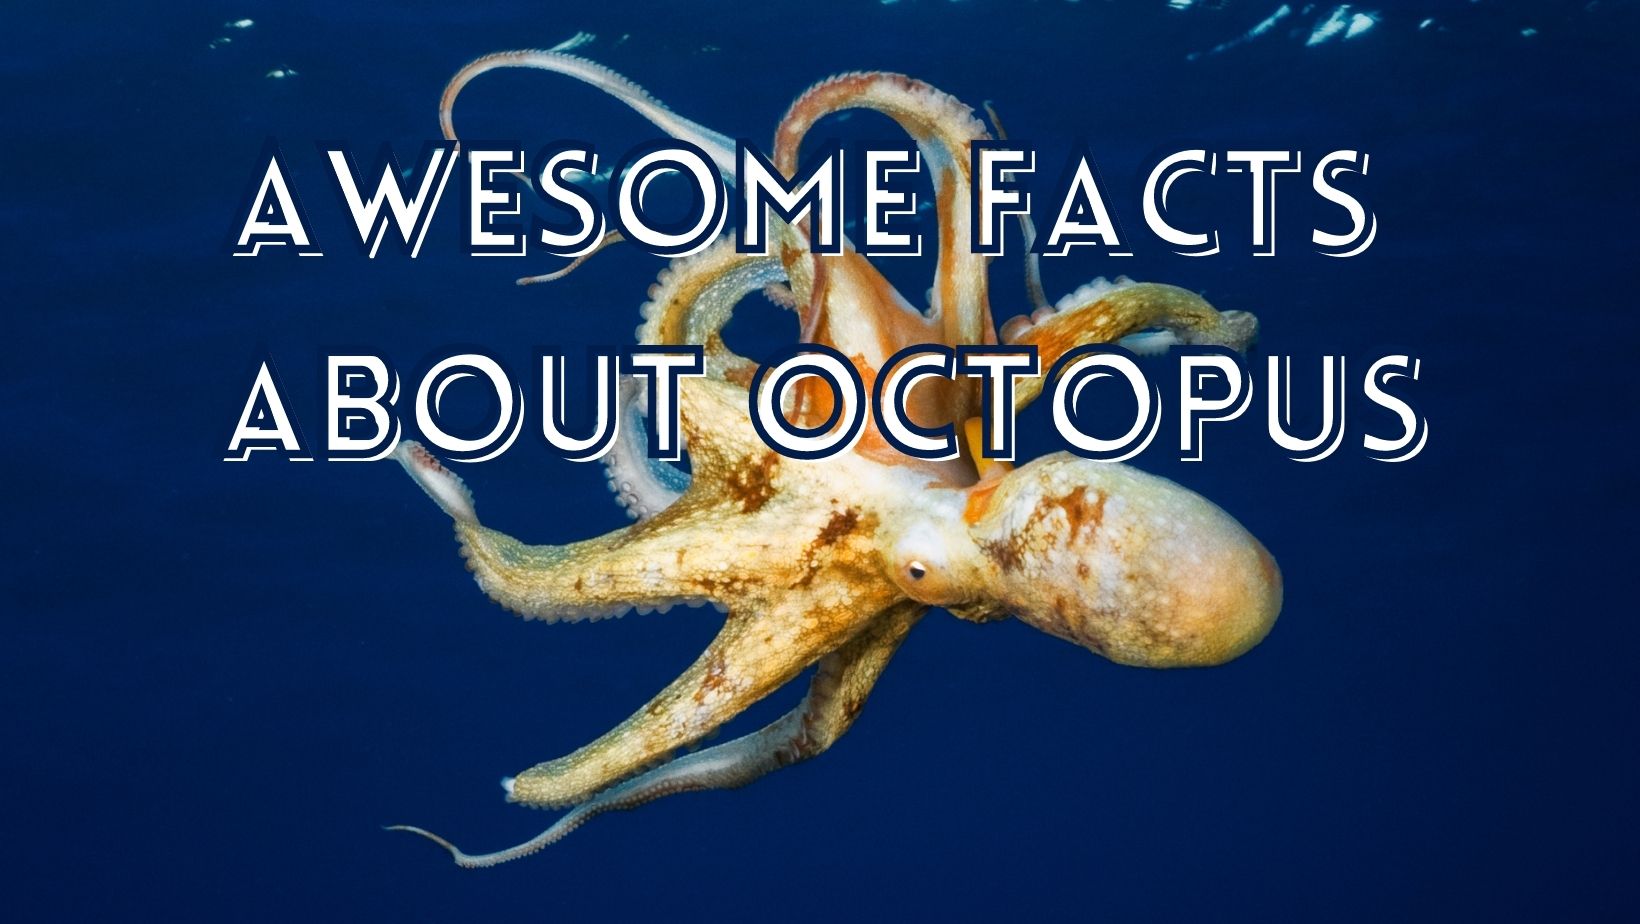 Interesting octopus facts